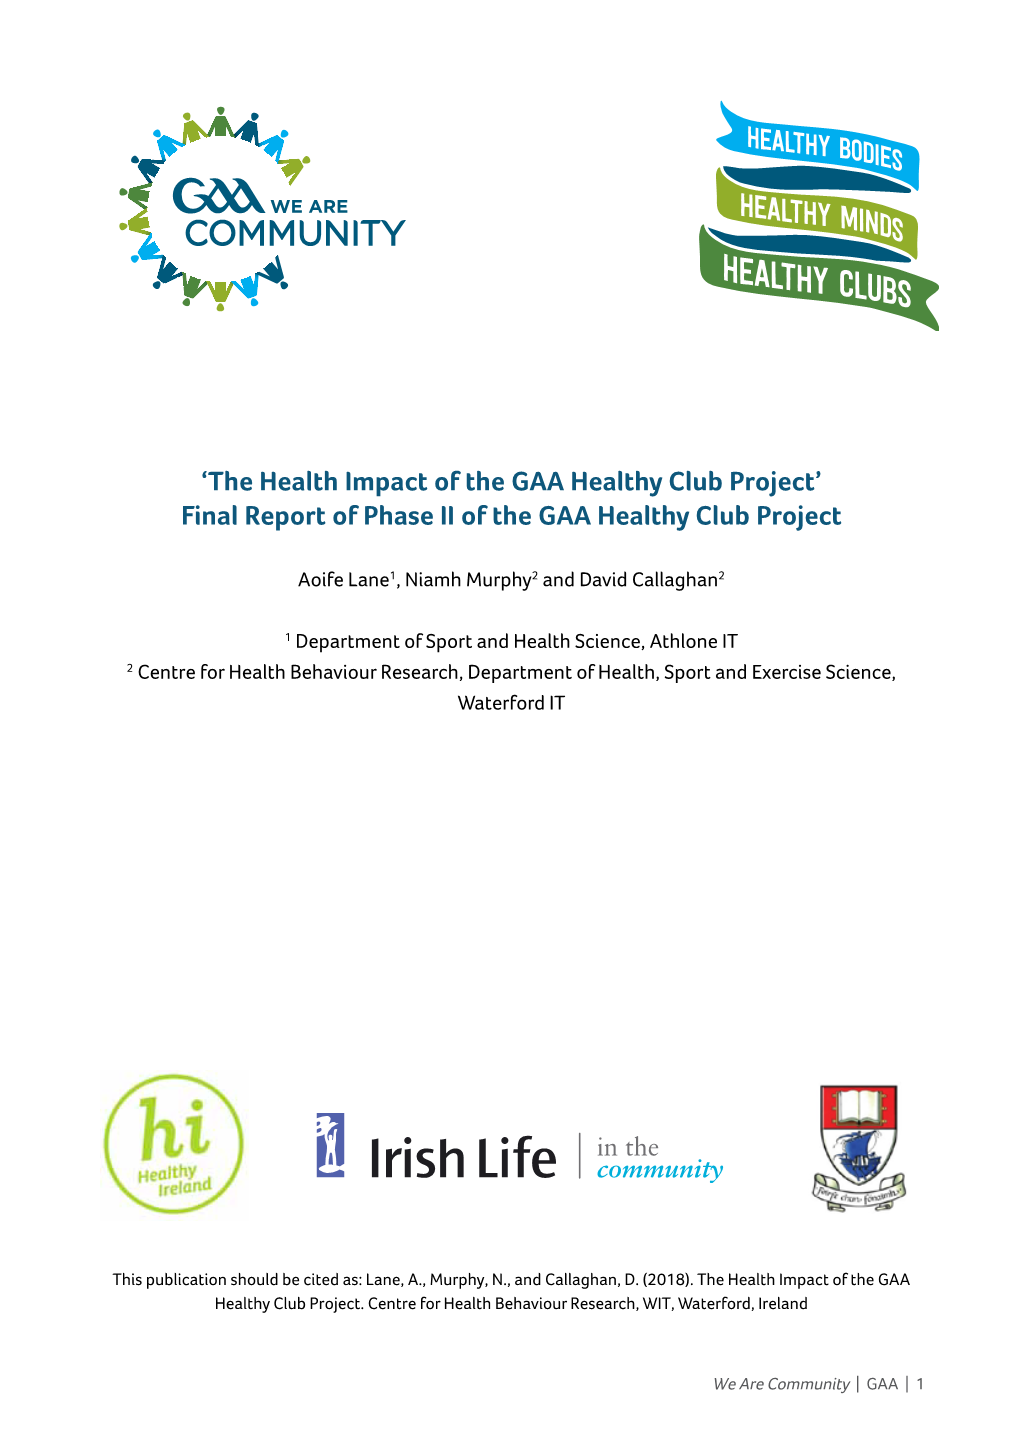 The Health Impact of the GAA Healthy Club Project’ Final Report of Phase II of the GAA Healthy Club Project